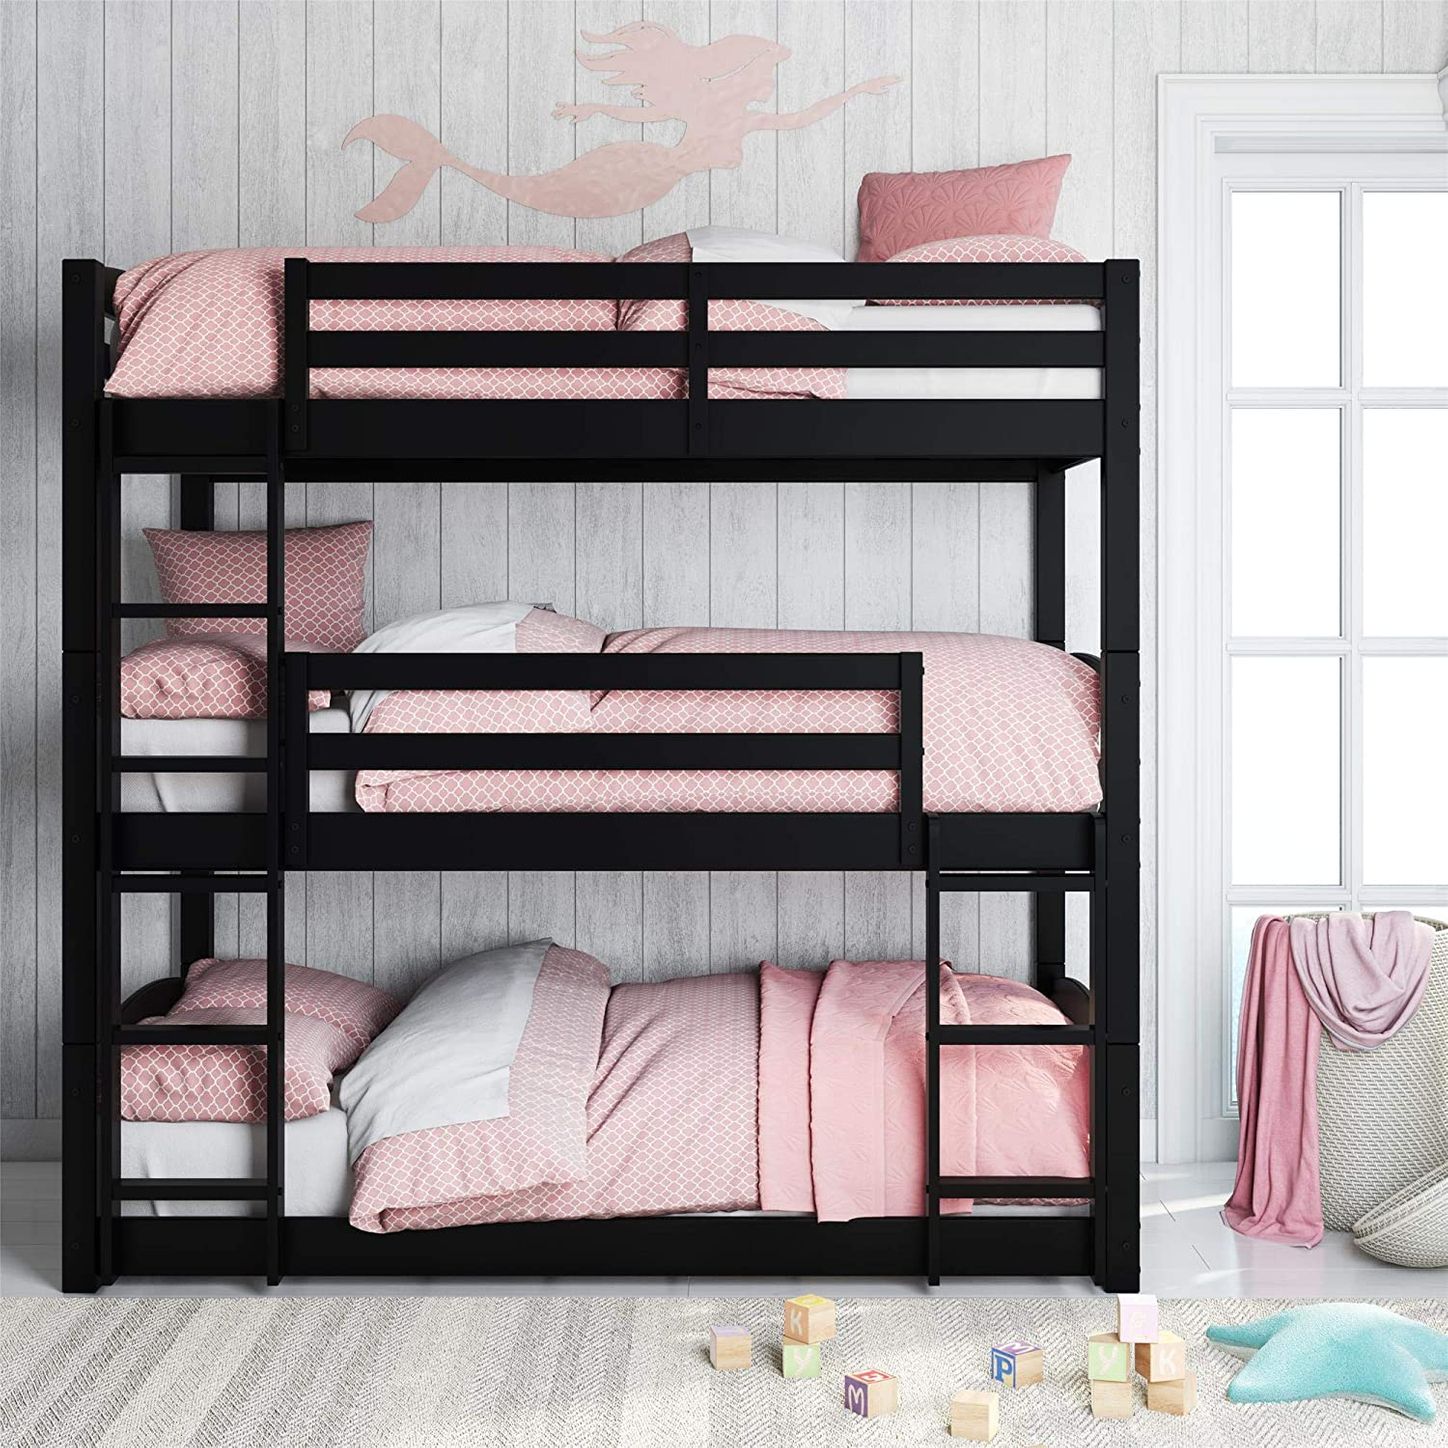 8 Best Bunk Beds 2020 The Strategist, 5 Person Bunk Bed